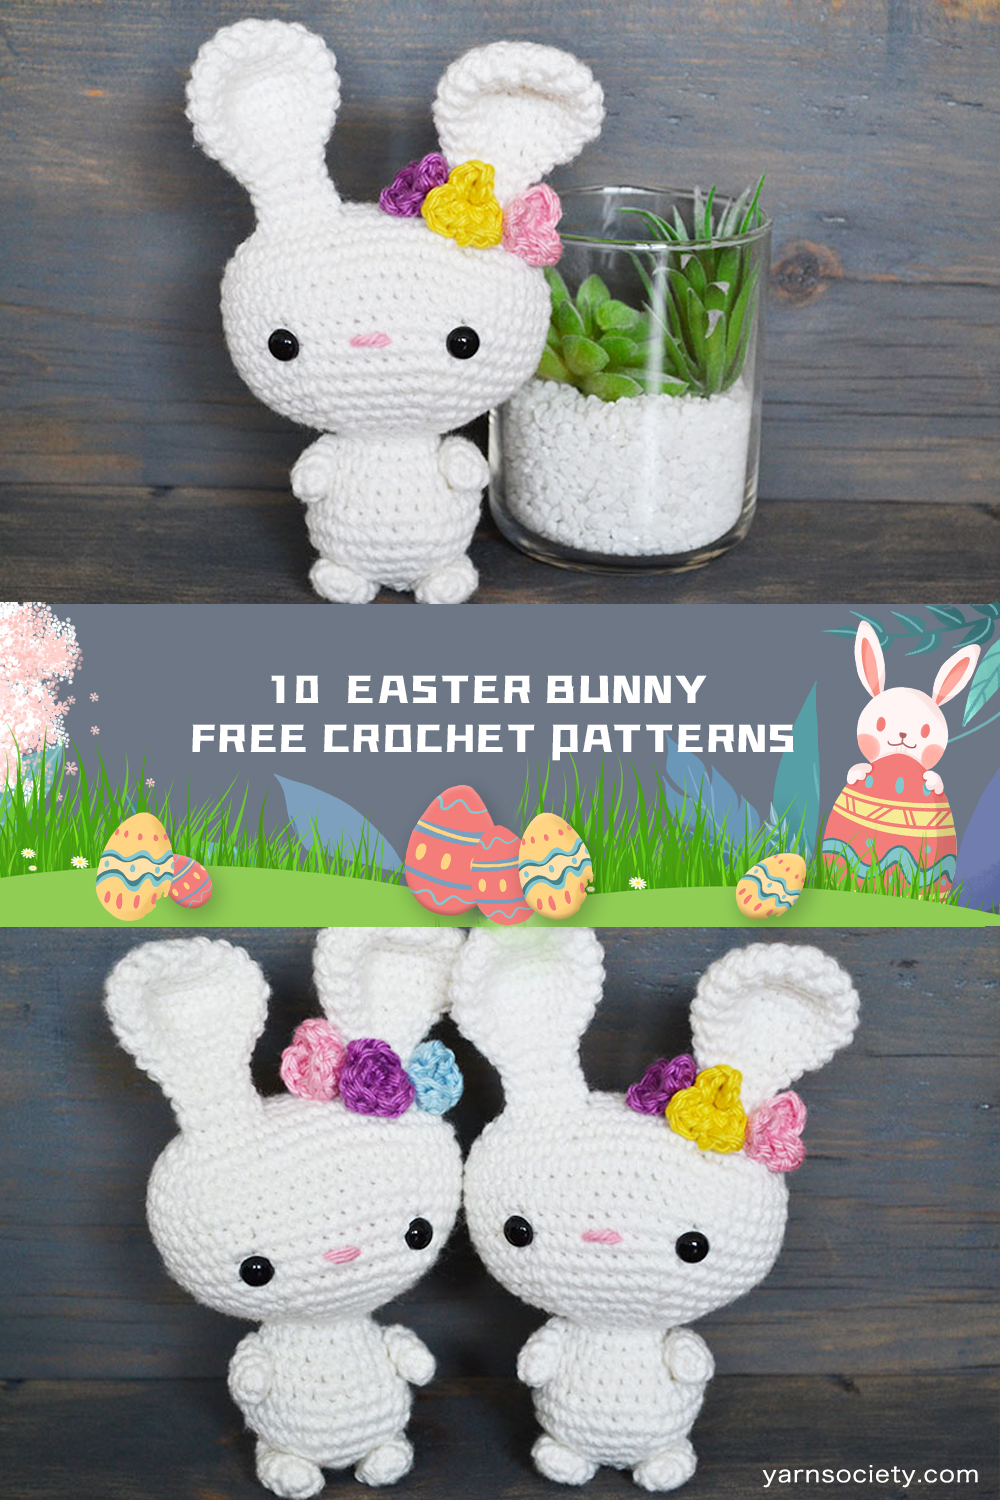 10 Easter Bunny FREE Crochet Patterns 